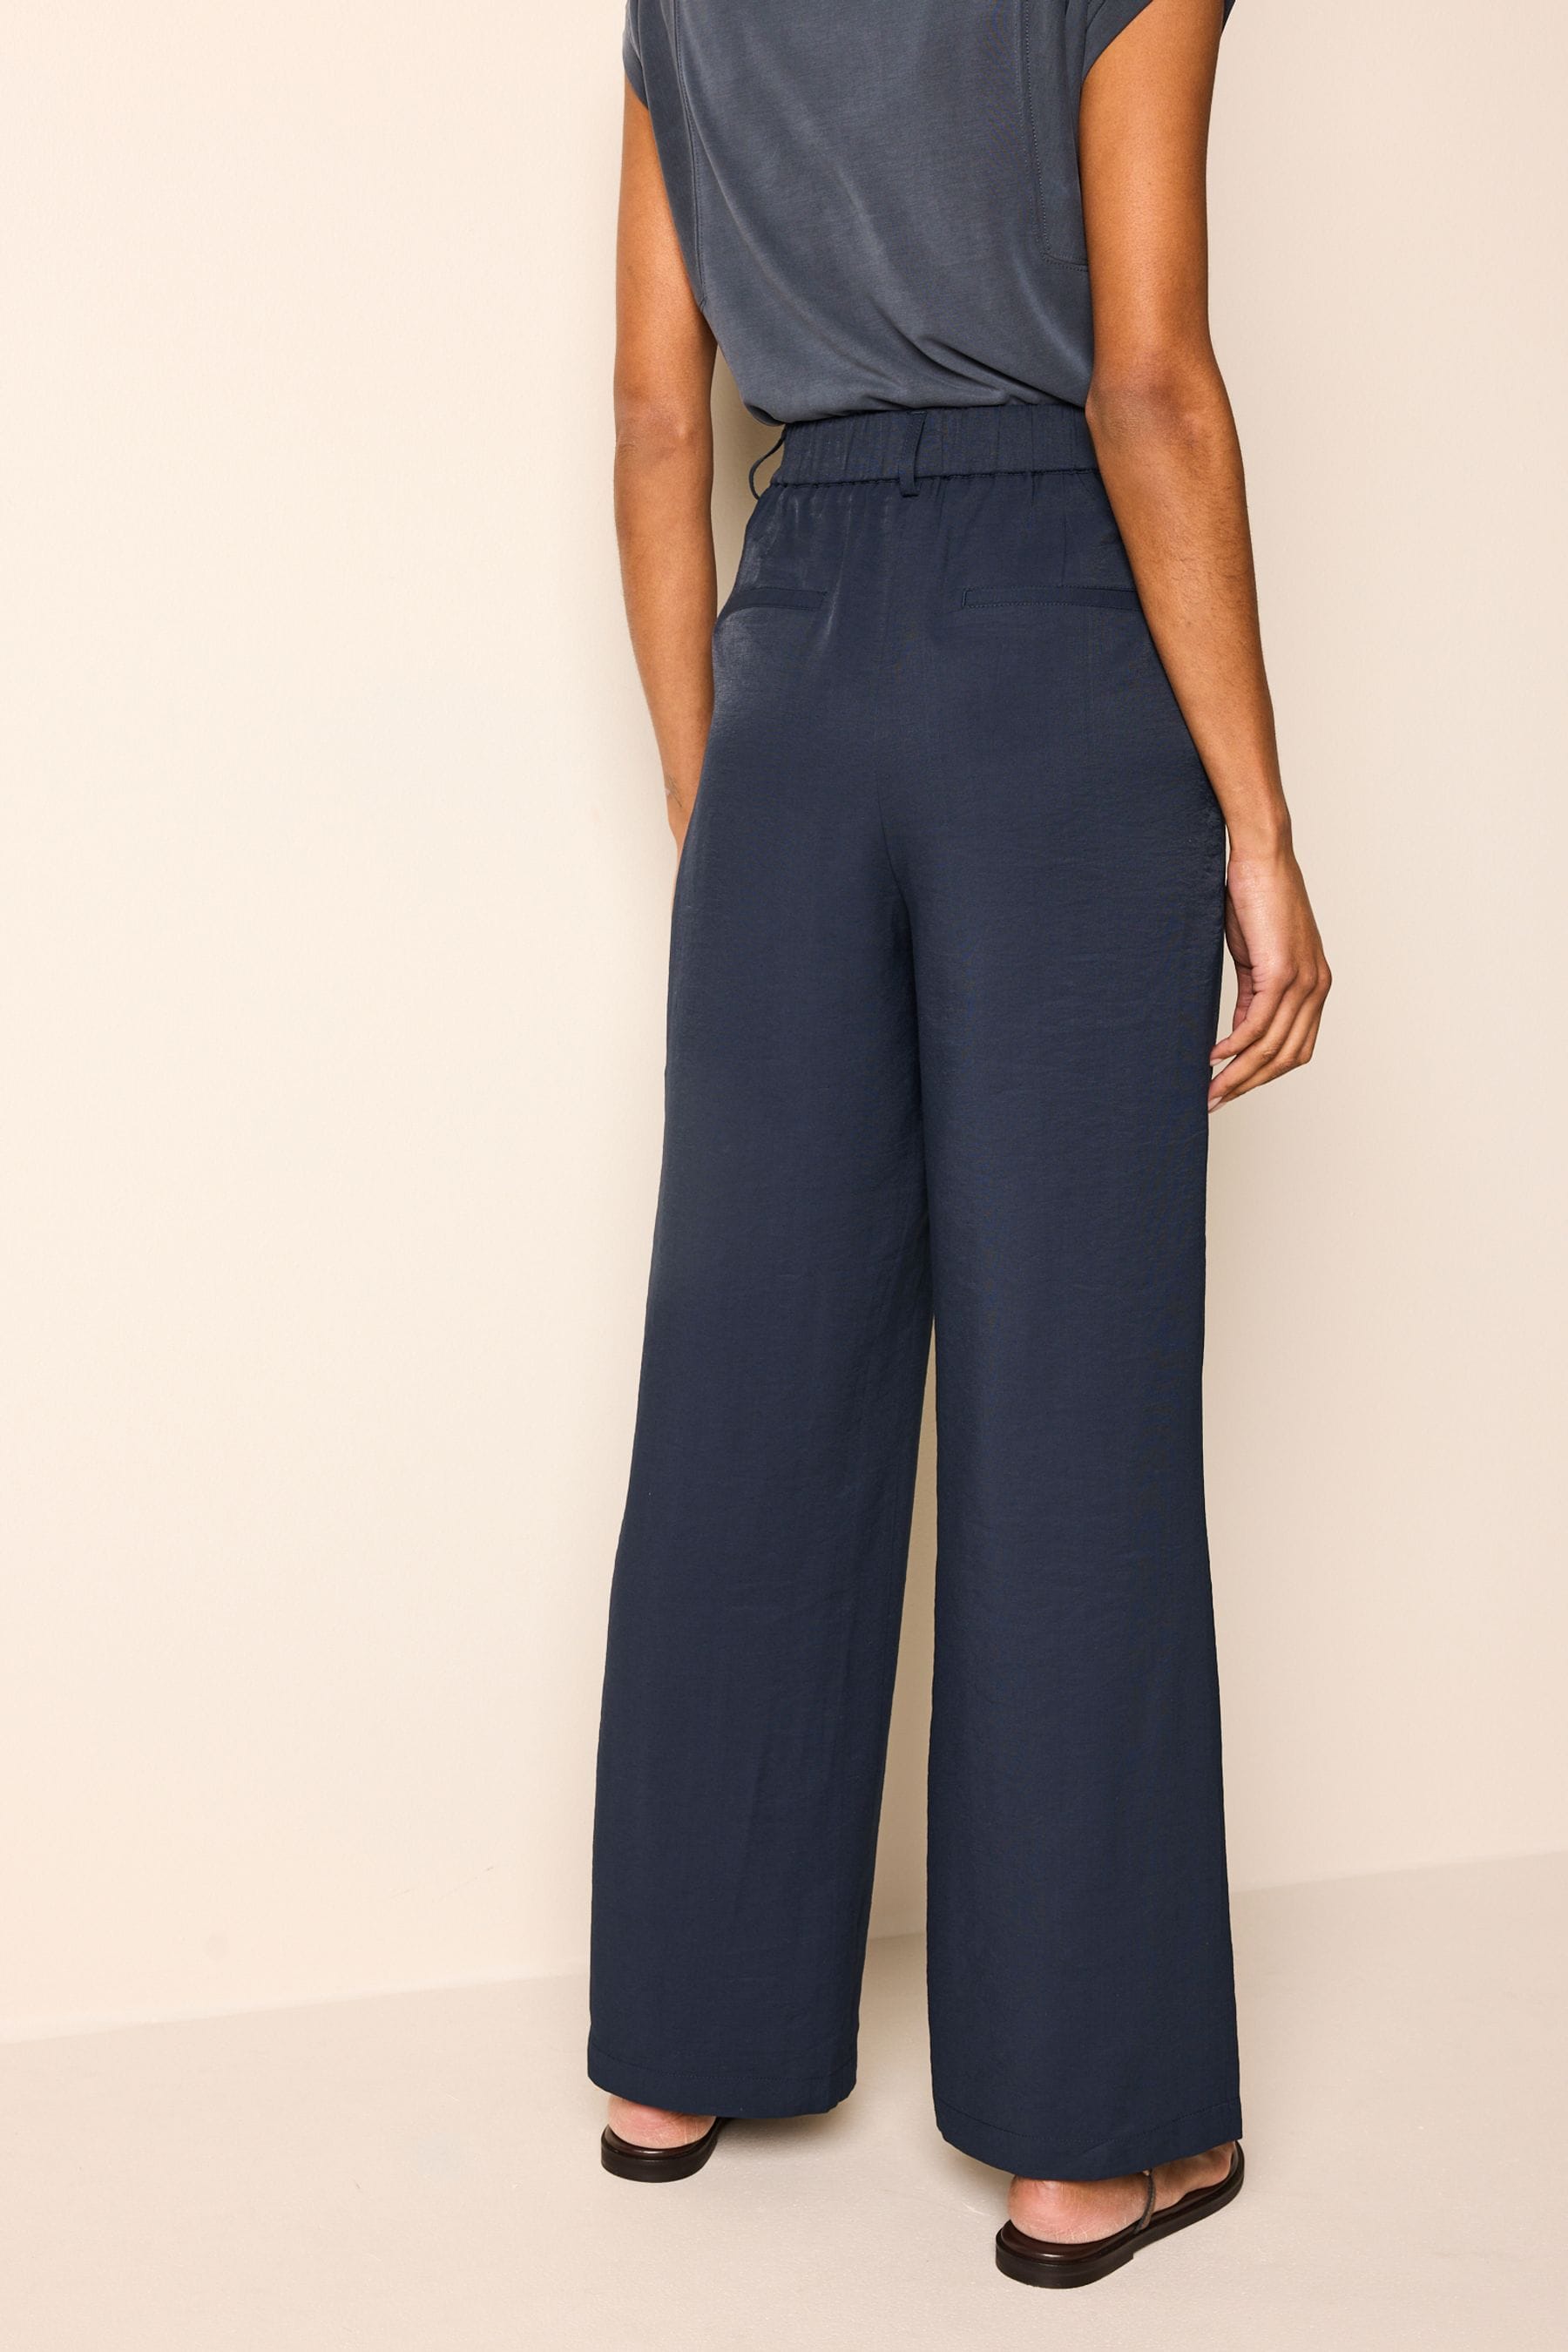 Buy Navy Blue Elasticated Back Wide Leg Trousers from the Next UK ...